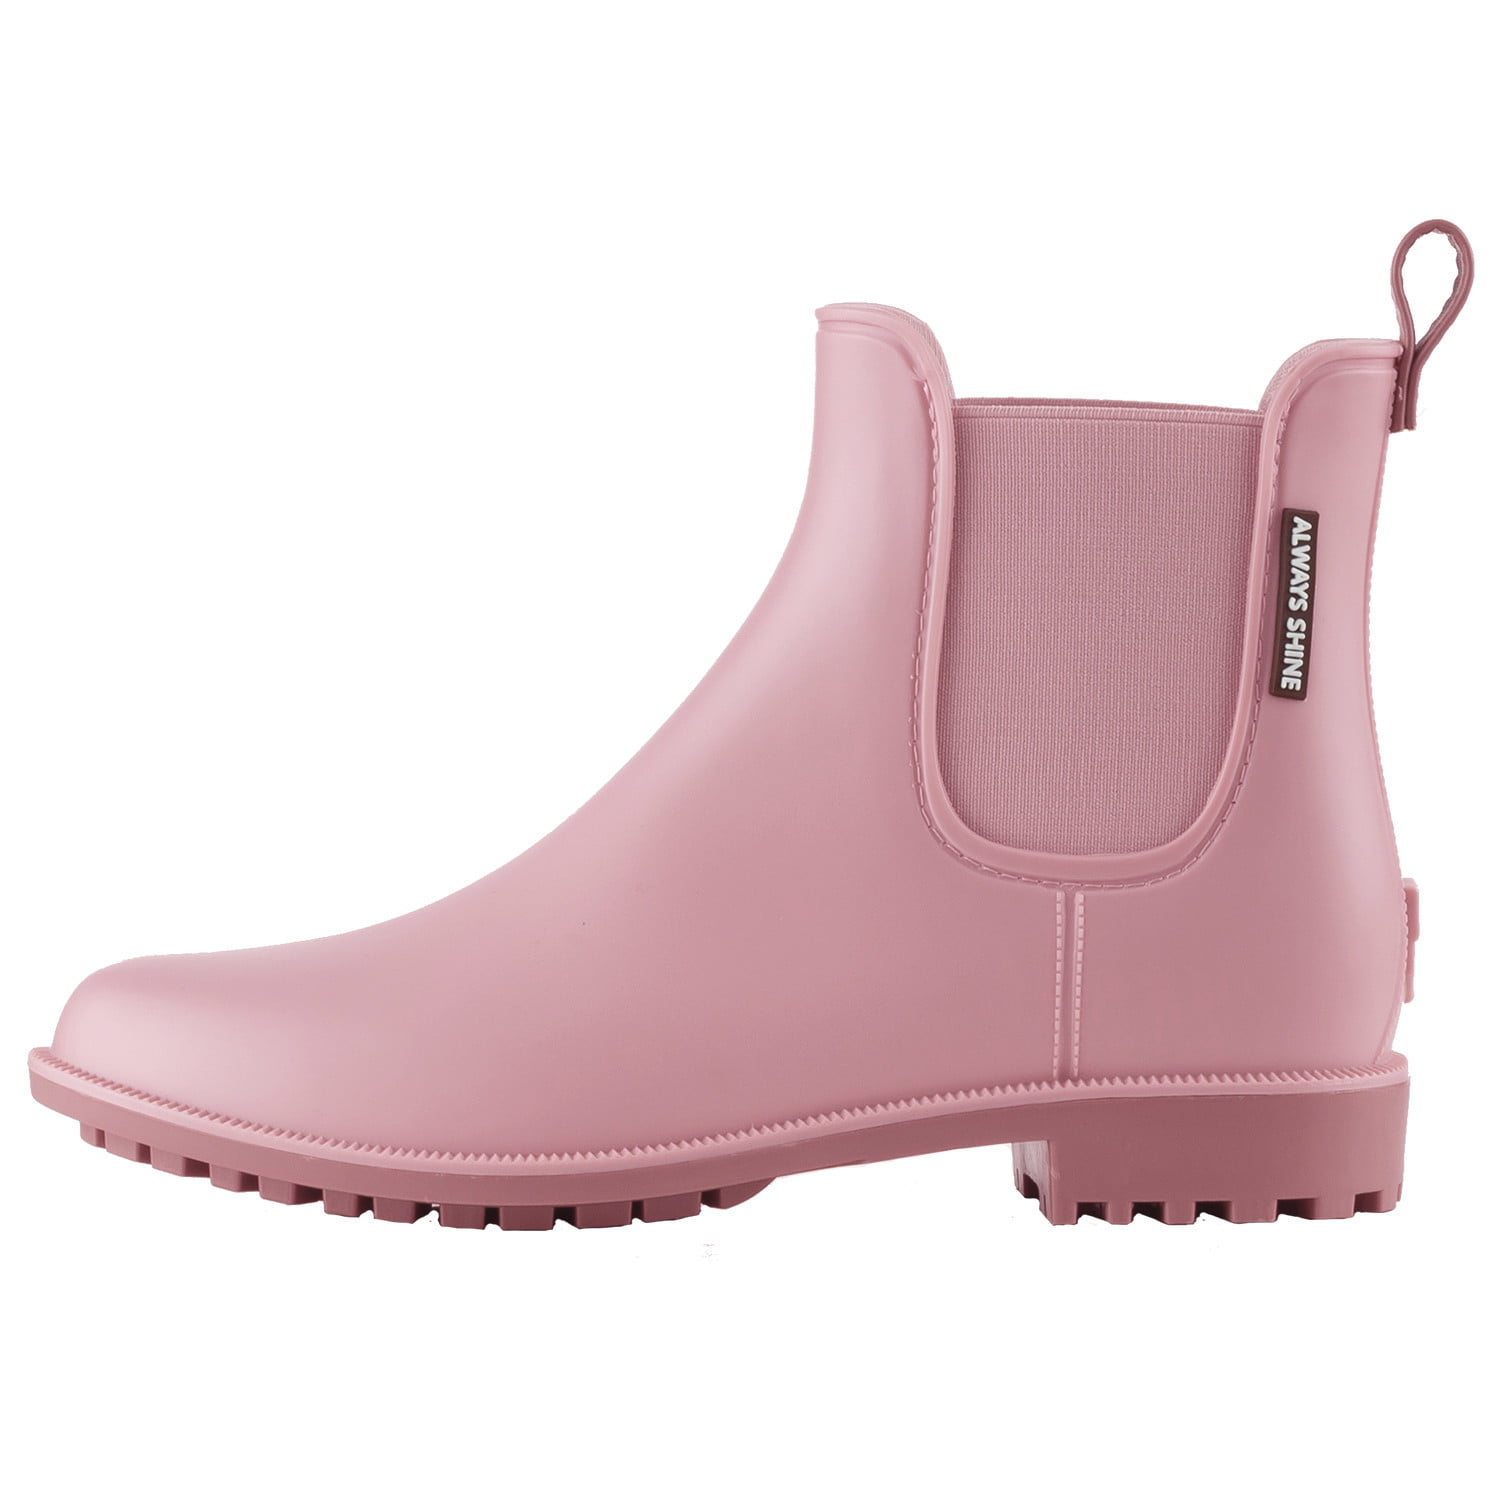 Planone Short rain boots for women and waterproof garden shoes，anti-slipping chelsea rainboots for ladies with comfortable insoles，stylish light ankle rain shoes and matte outdoor work shoes 